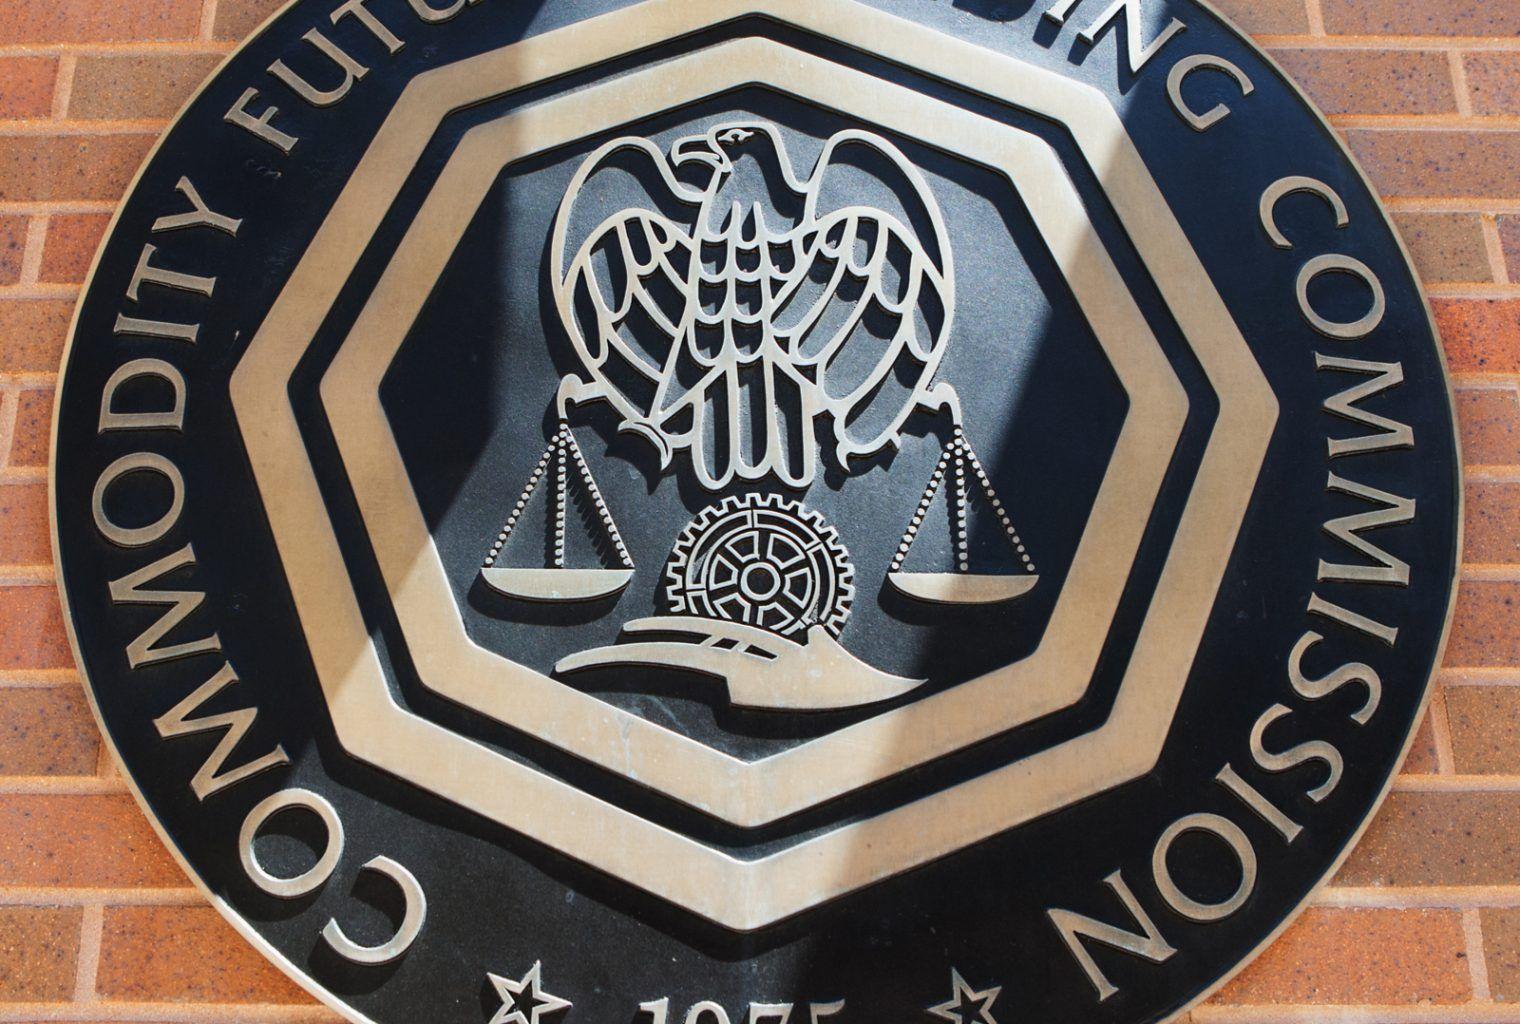 CFTC Logo - Virtual Currencies to Become Part of the Economic Practices of All